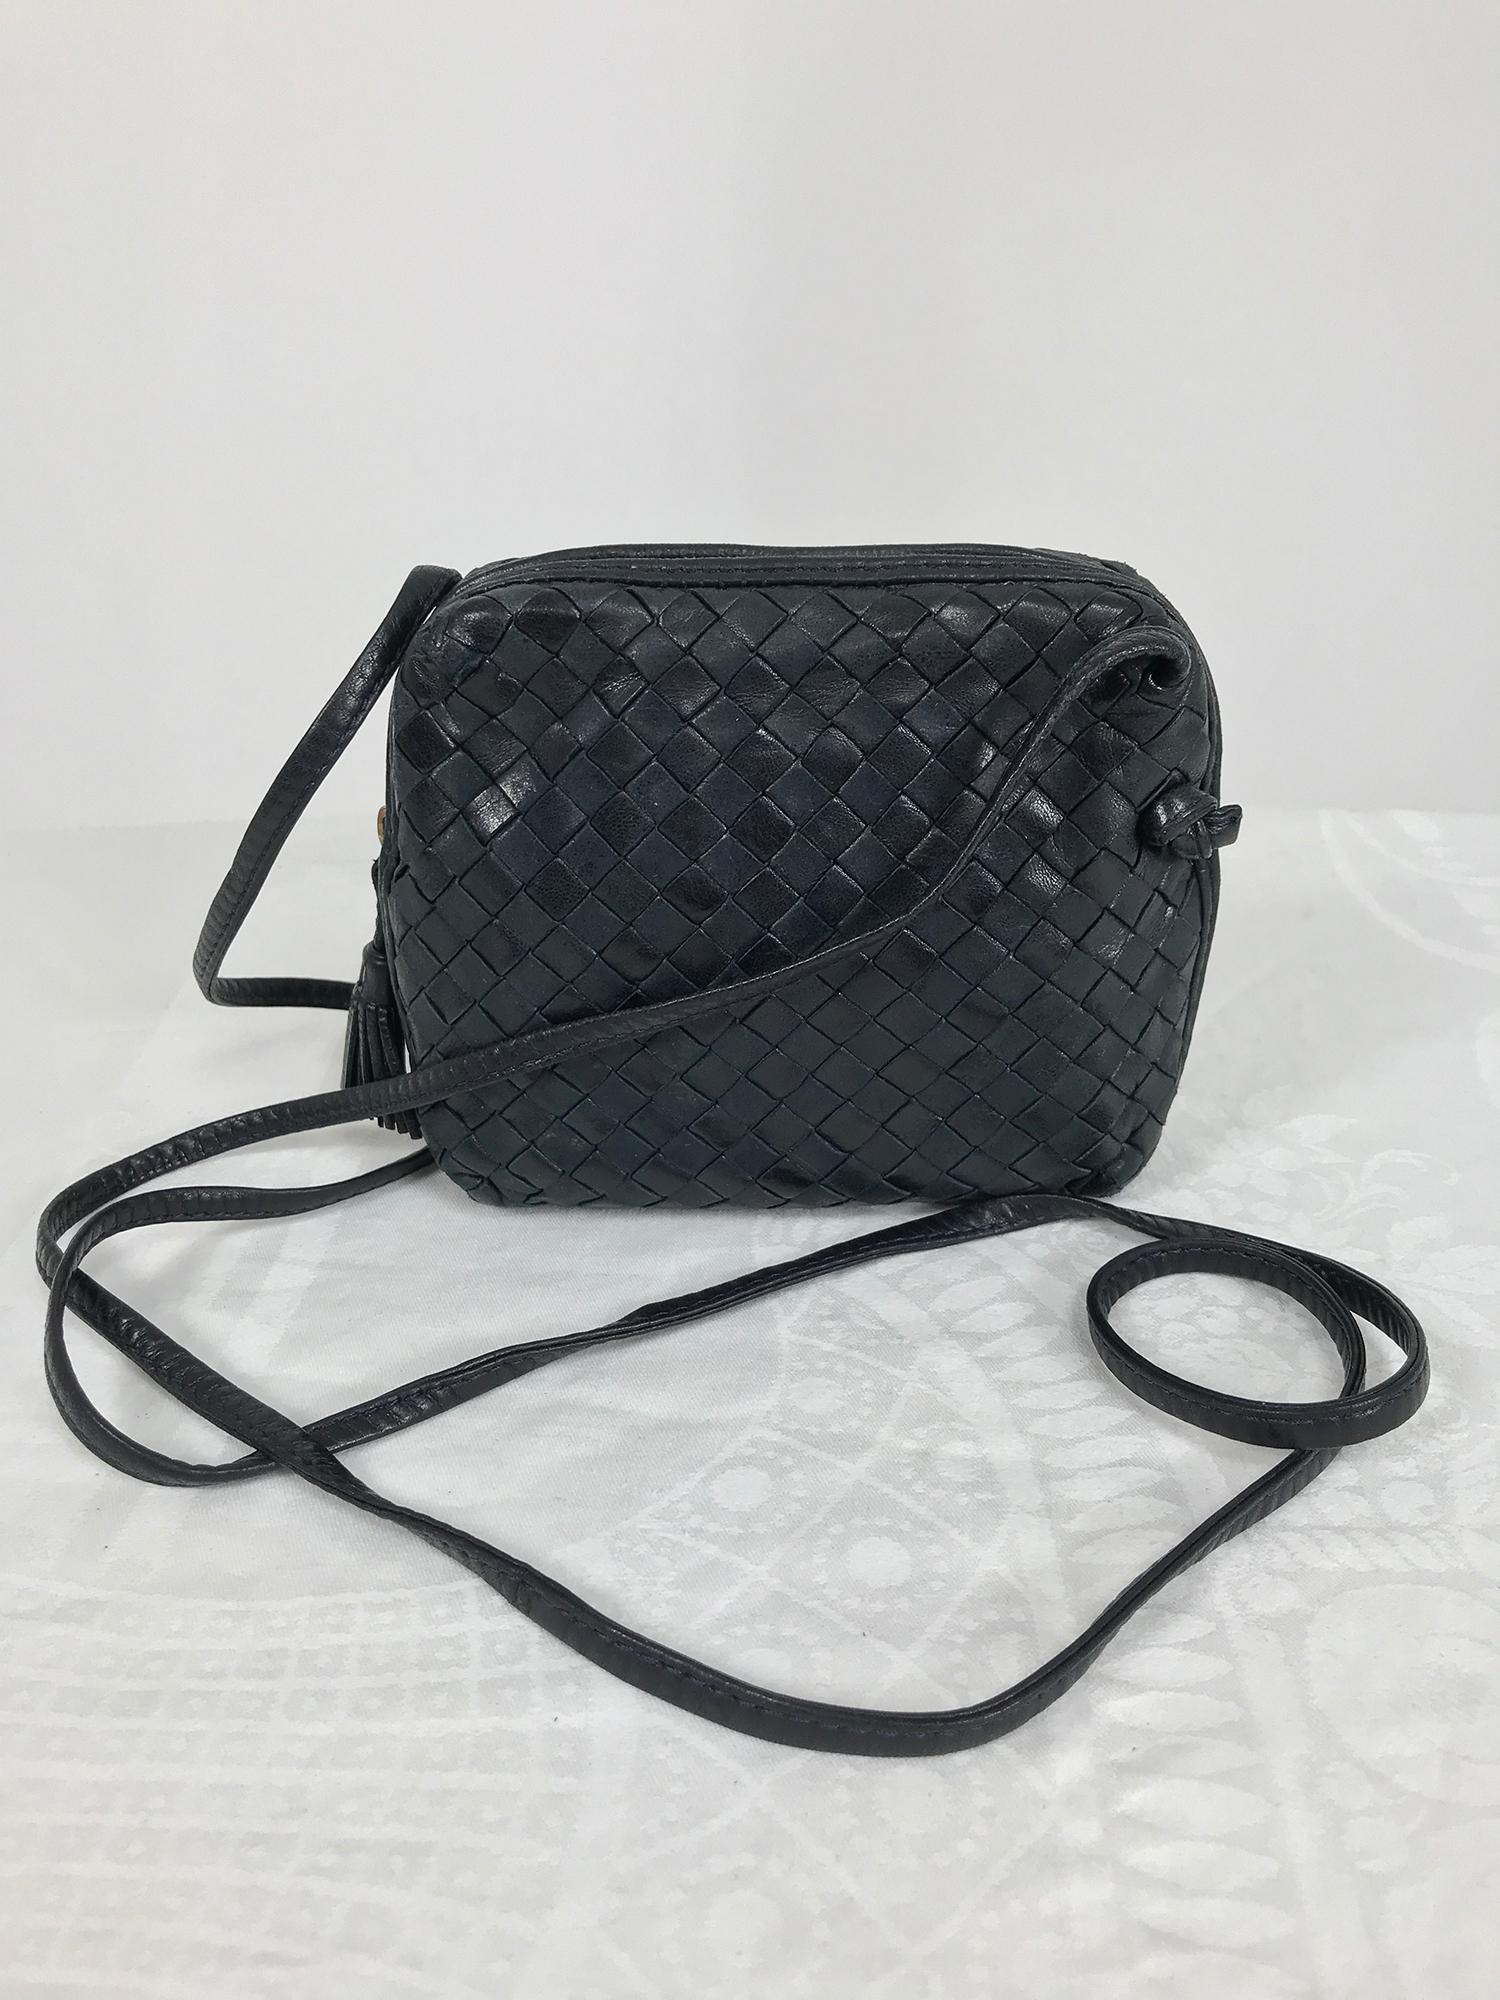 Bottega Veneta Intrecciato Nappa navy blue small cross body bag from the 1980s. Lined in beige satin. Closes with a bass zipper. Together with protector bag. In Very good pre owned condition.
Measurements are in inches:
6 wide
5 1/2 high
1 1/2